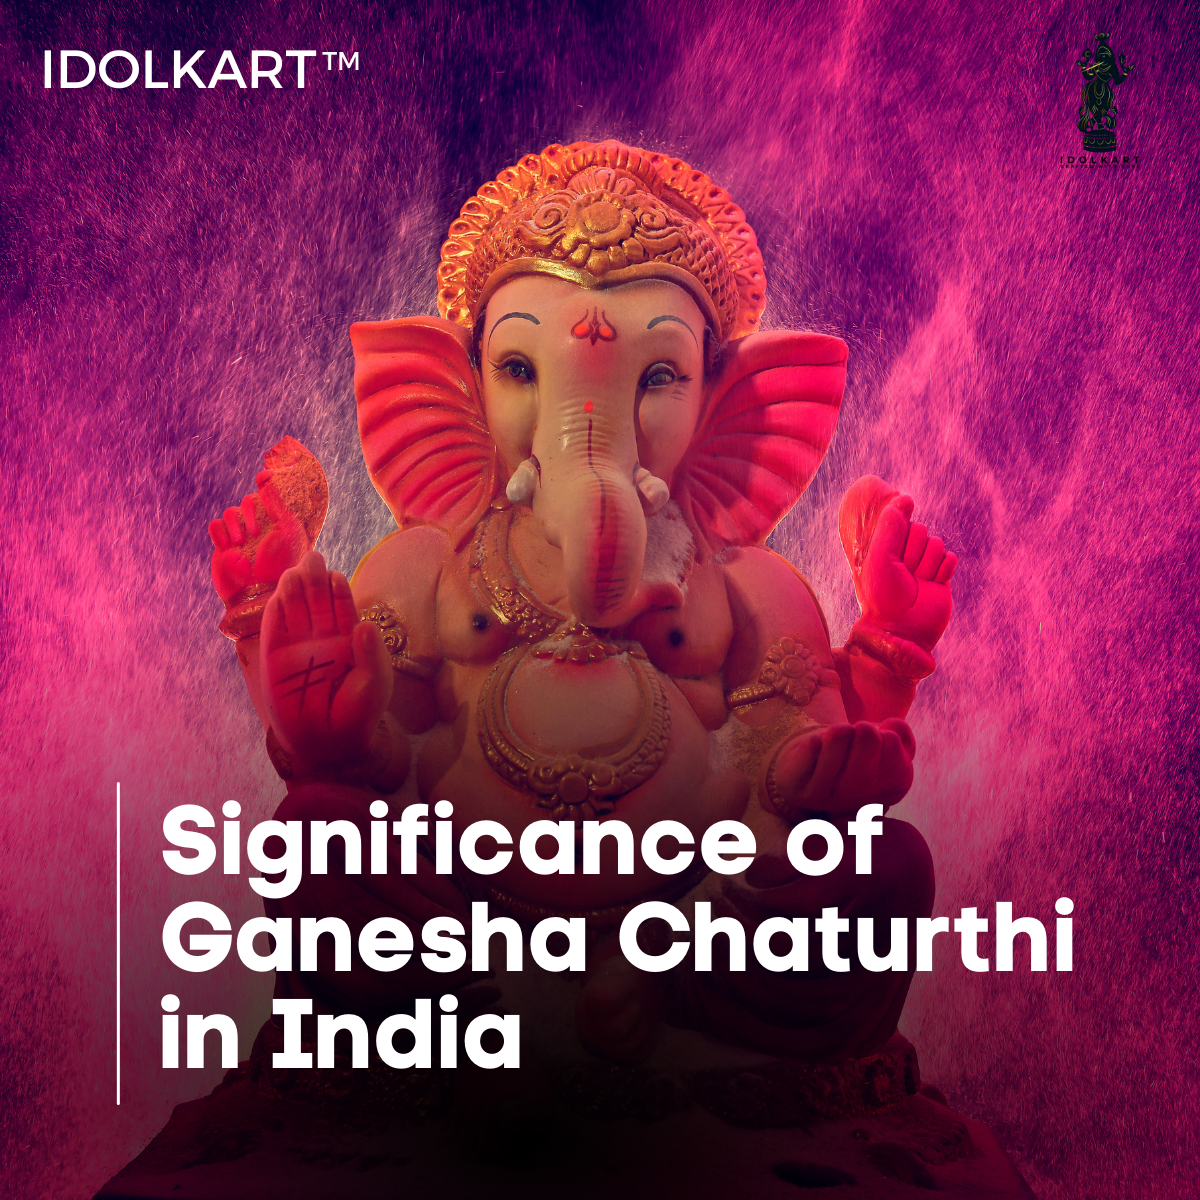 Significance of Ganesh Chaturthi in India